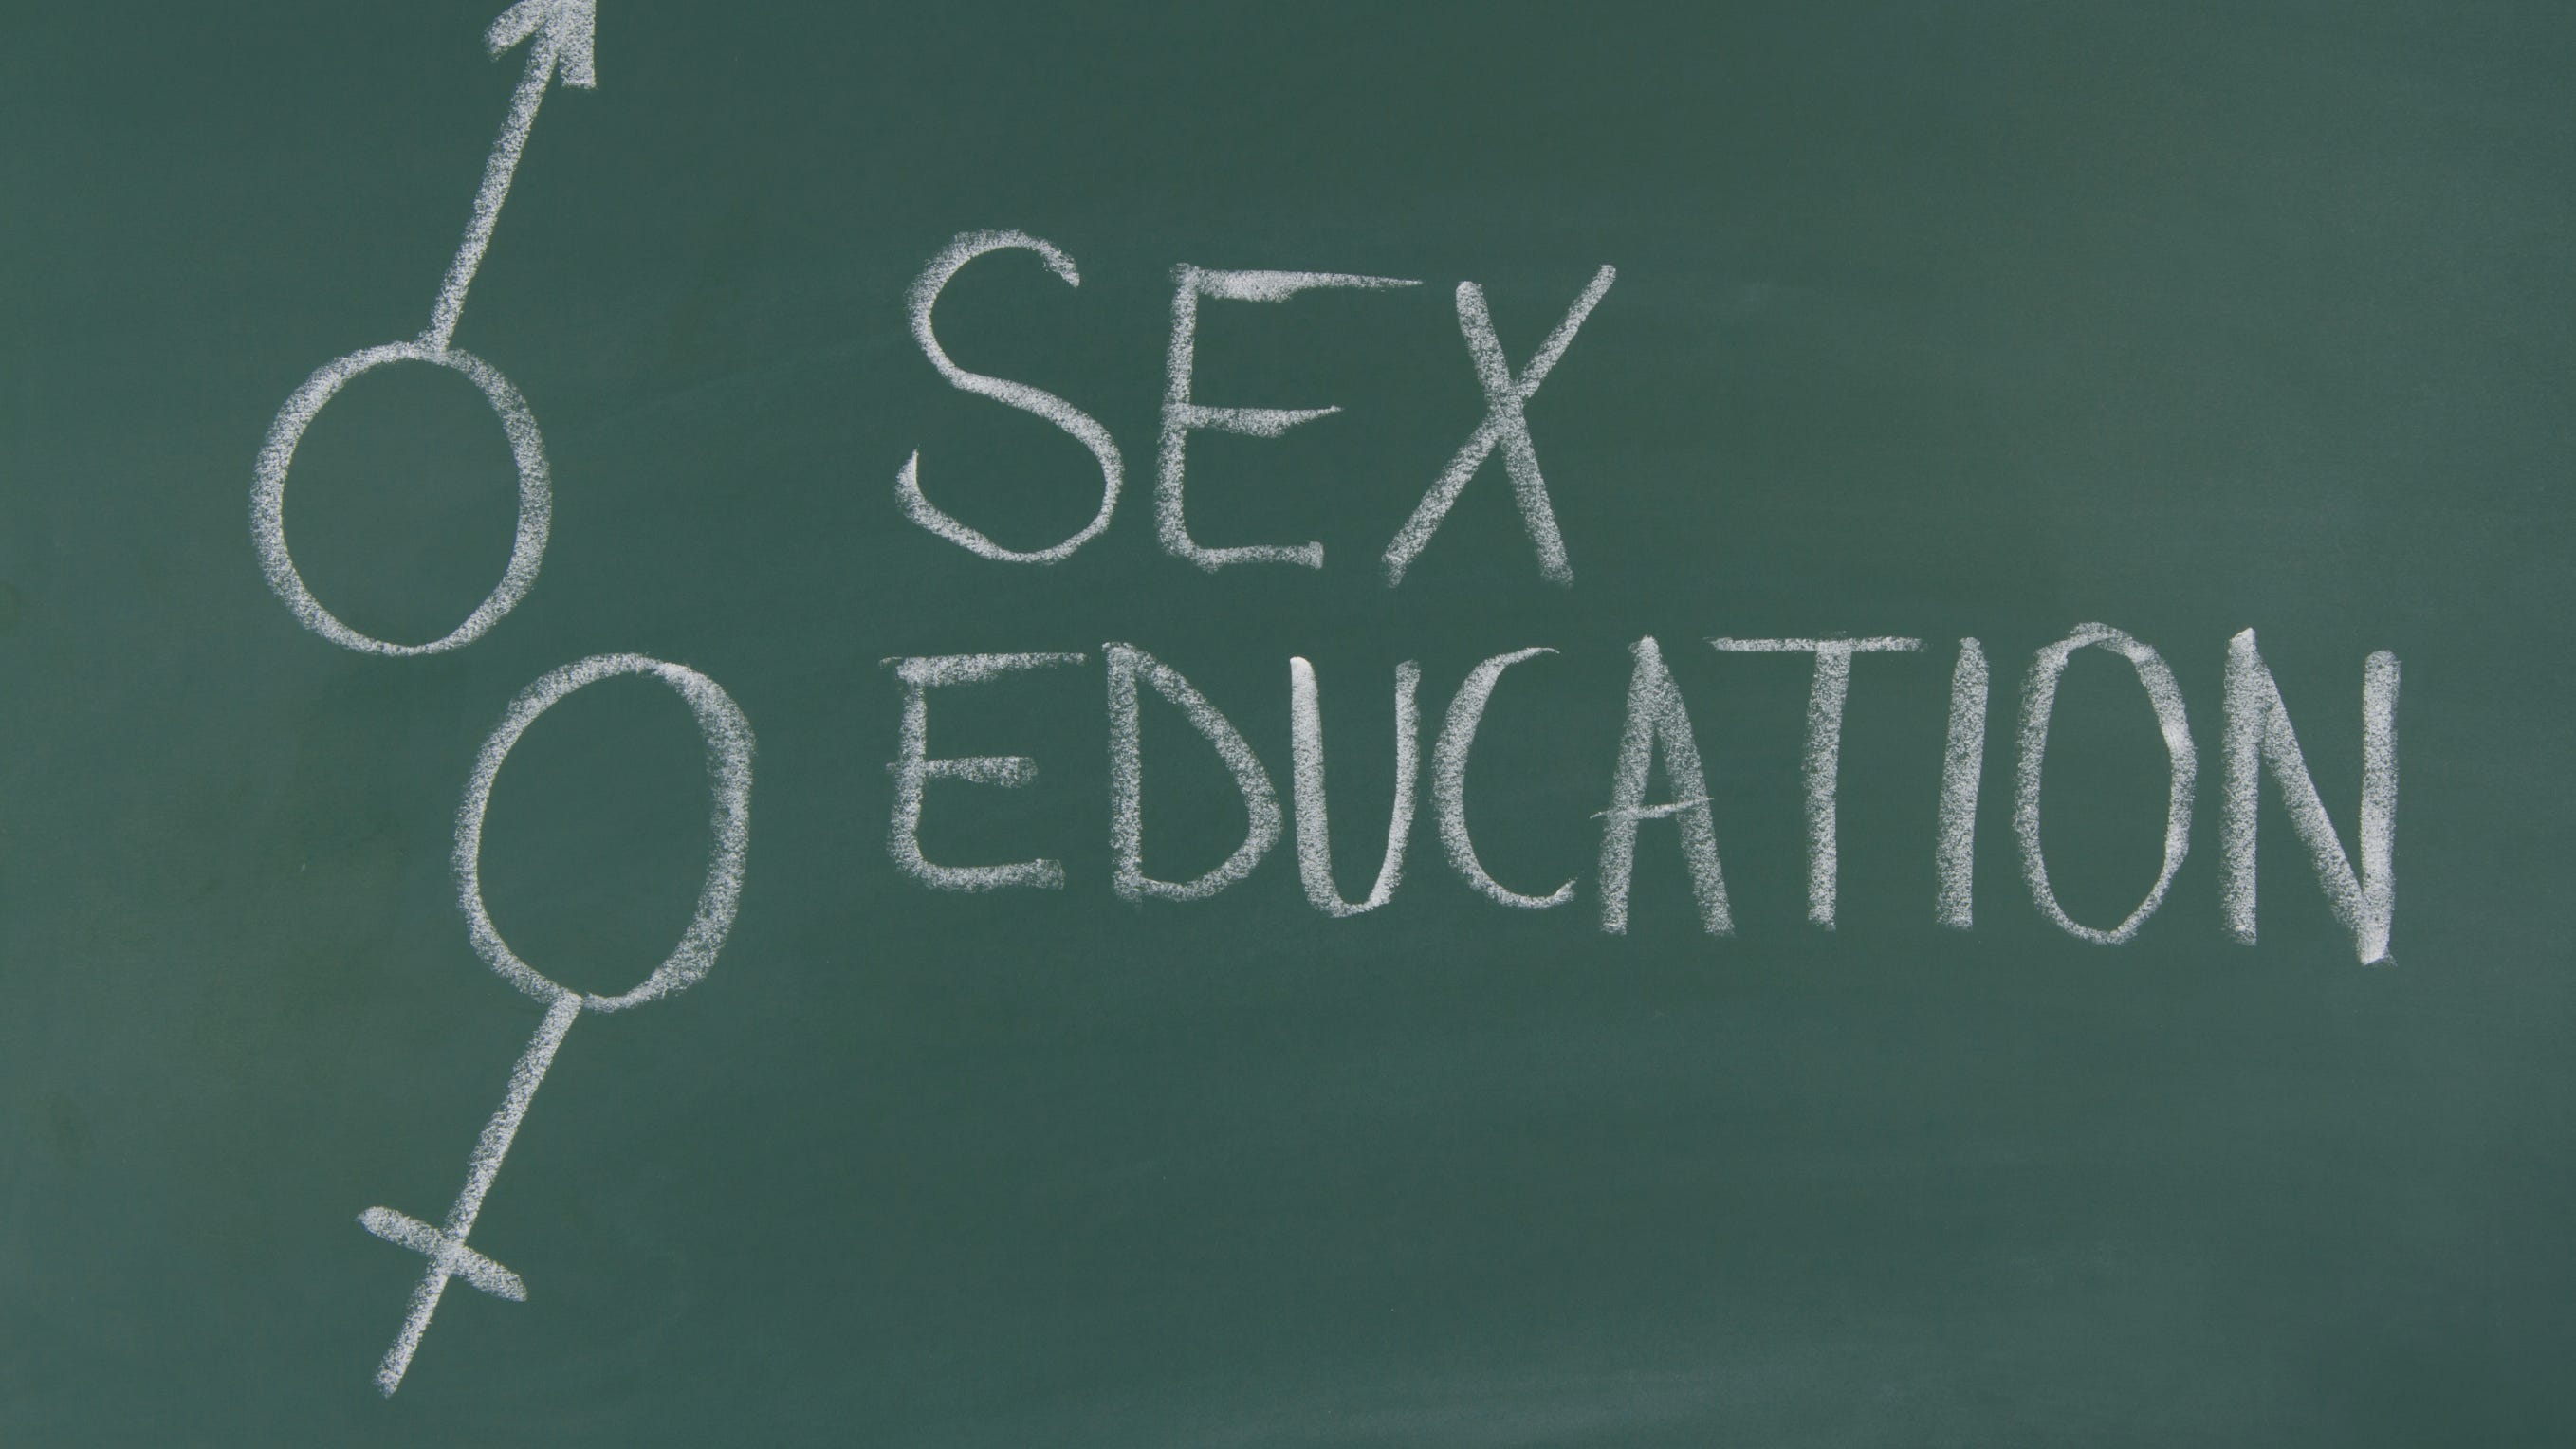 New Nj Sex Ed Curriculum Draws Criticism Heres Whats In It 3070